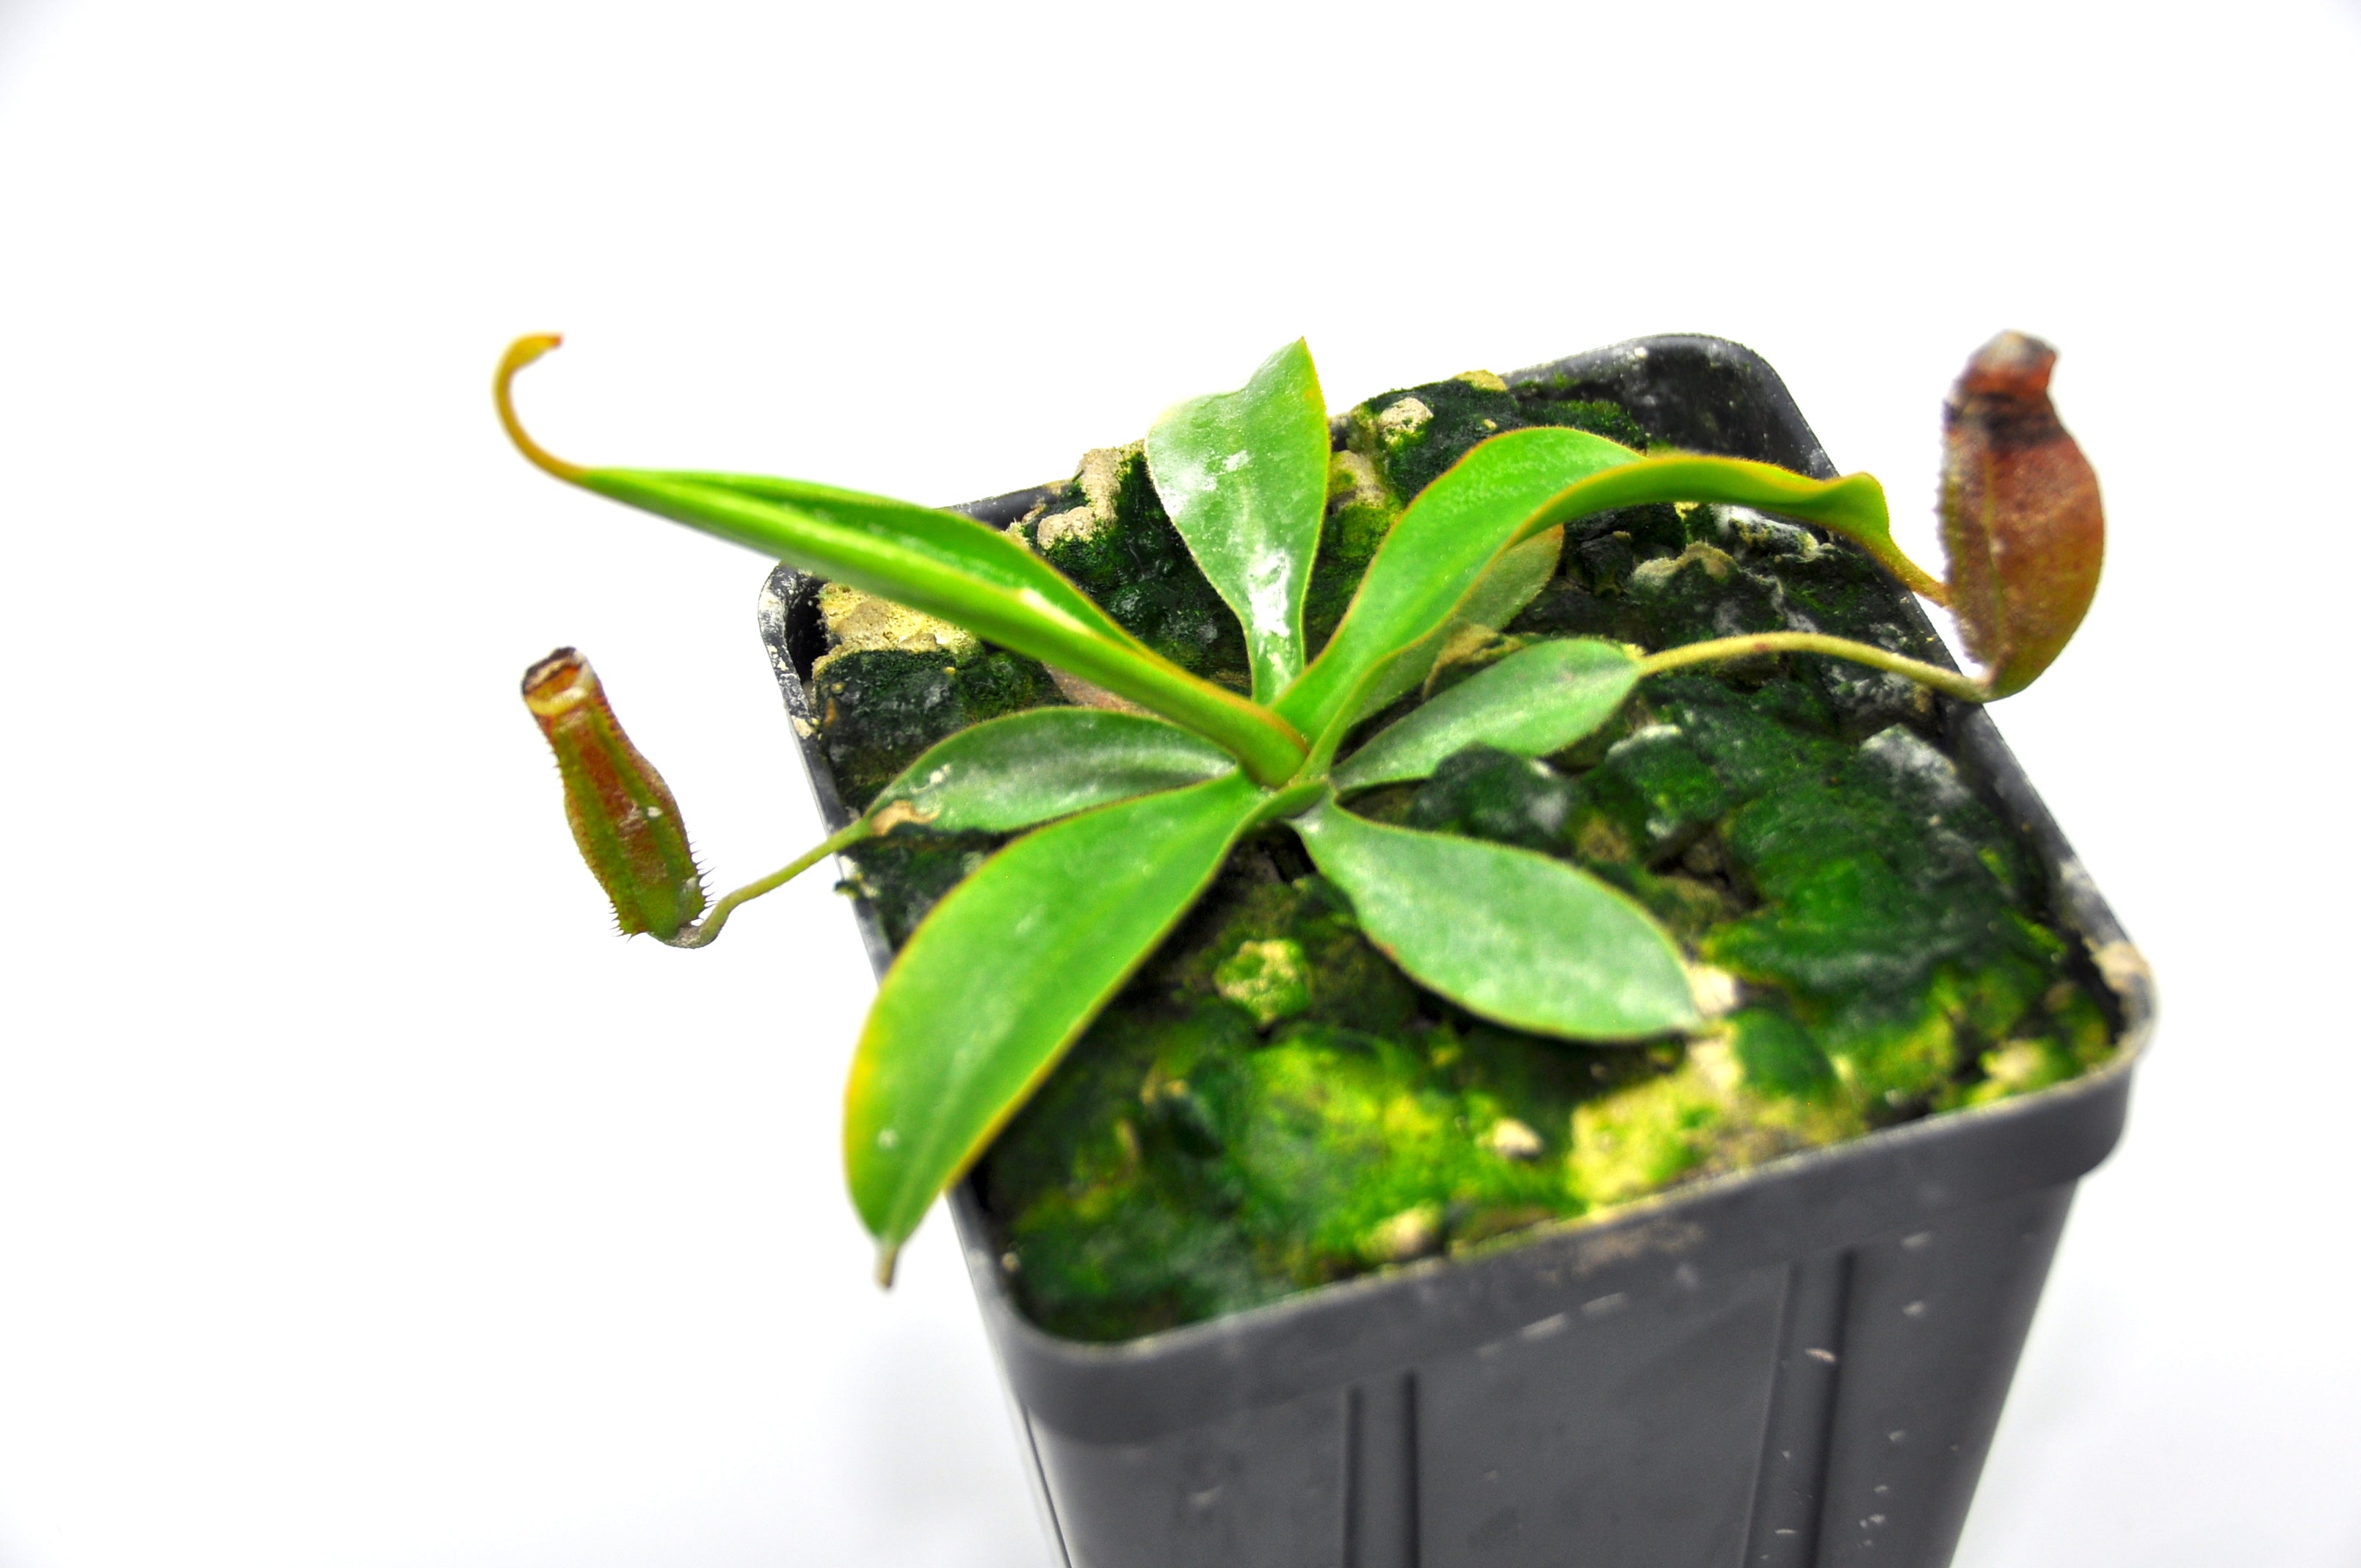 Nepenthes spectabilis x lowii BE-4524